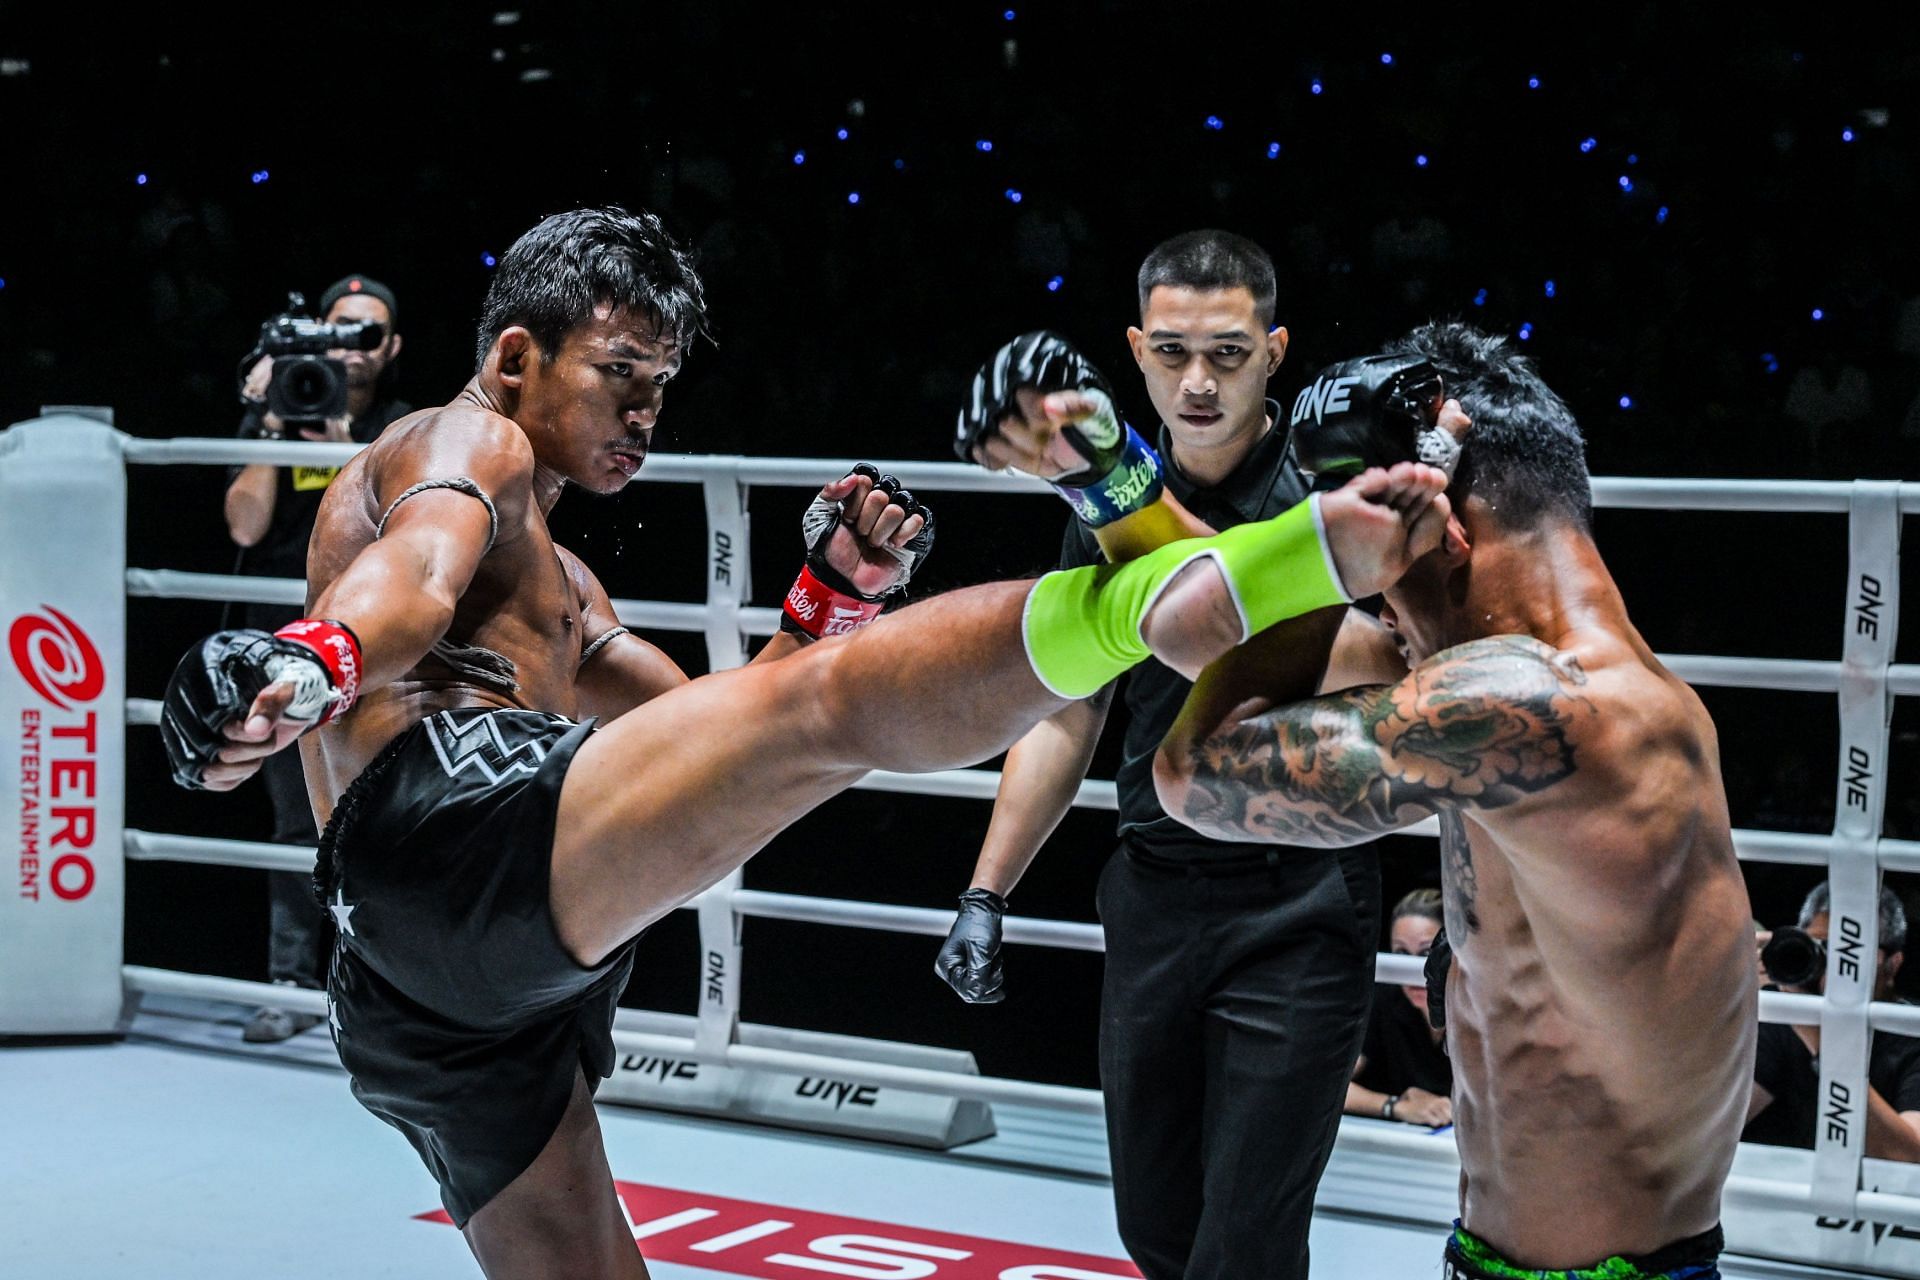 Superlek lands a high kick on Kongthoranee at ONE Friday Fights 68.